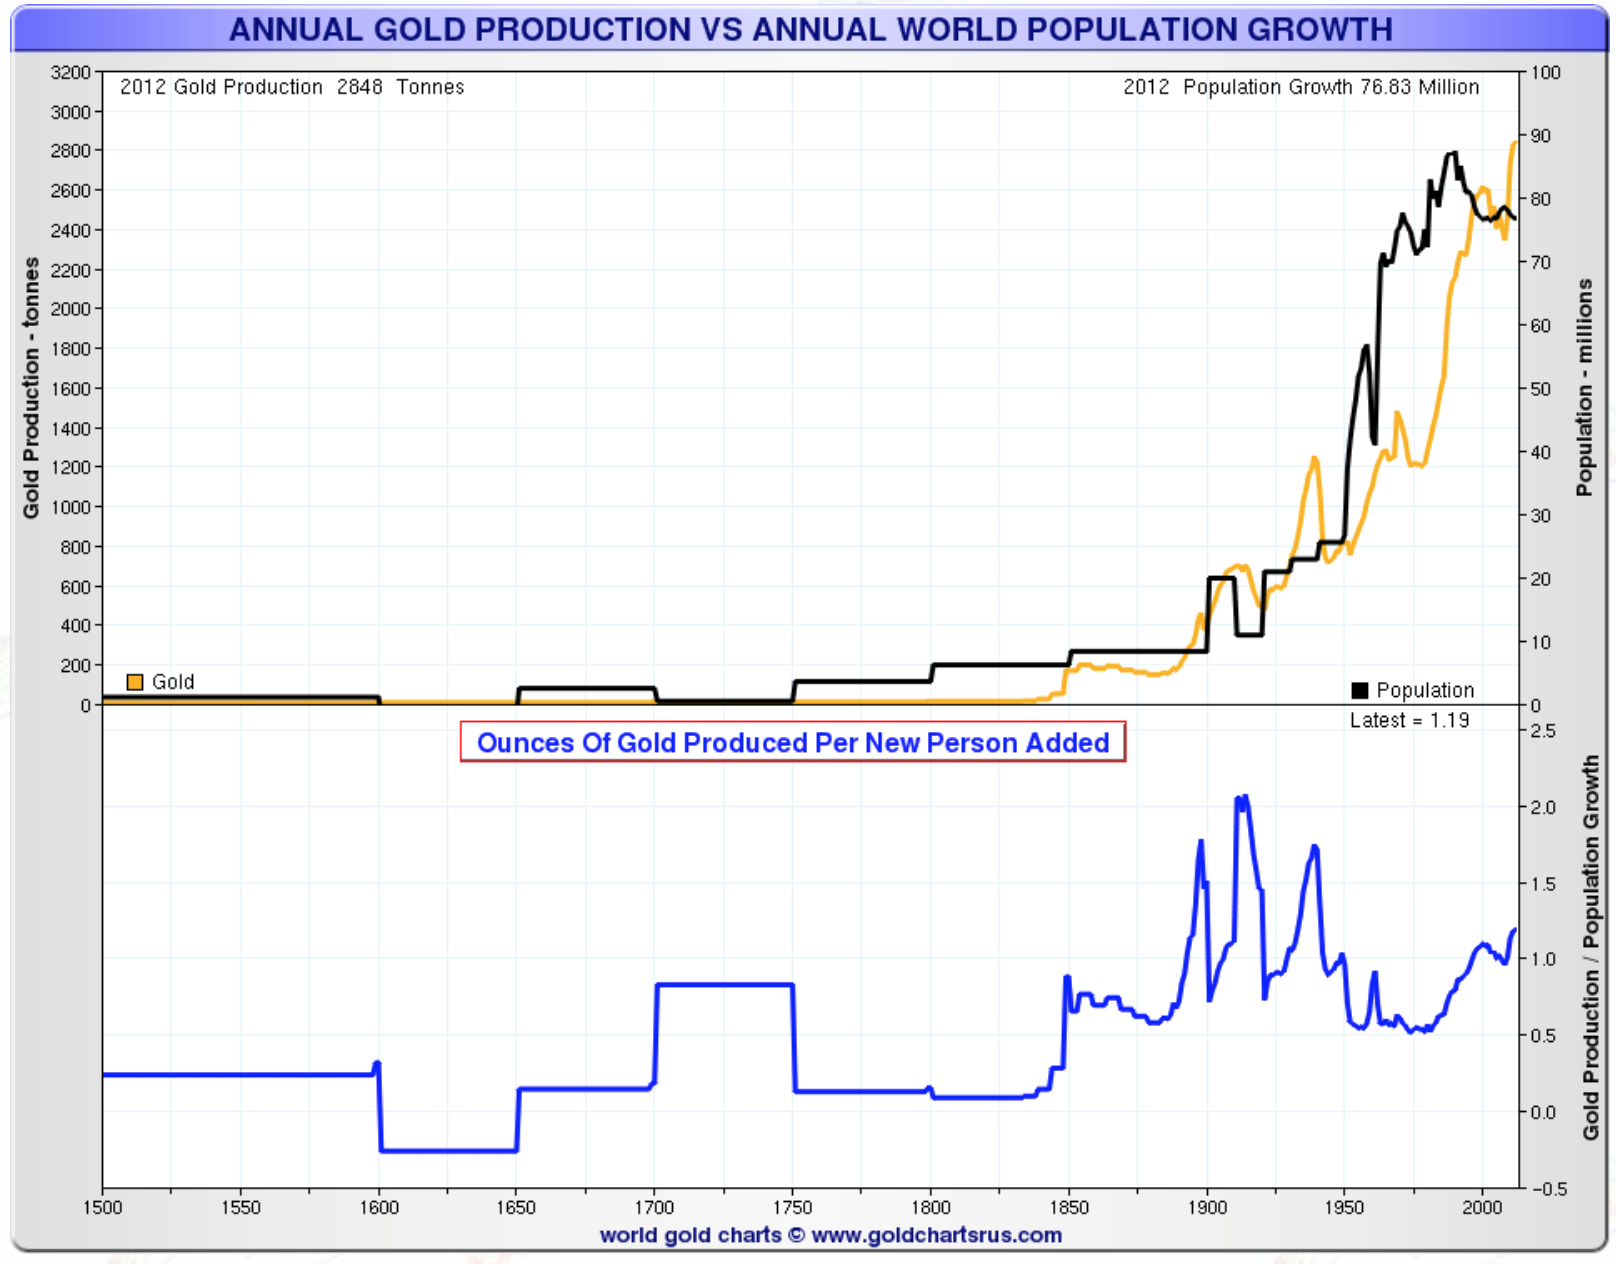 Annual gold production vs world population growth 